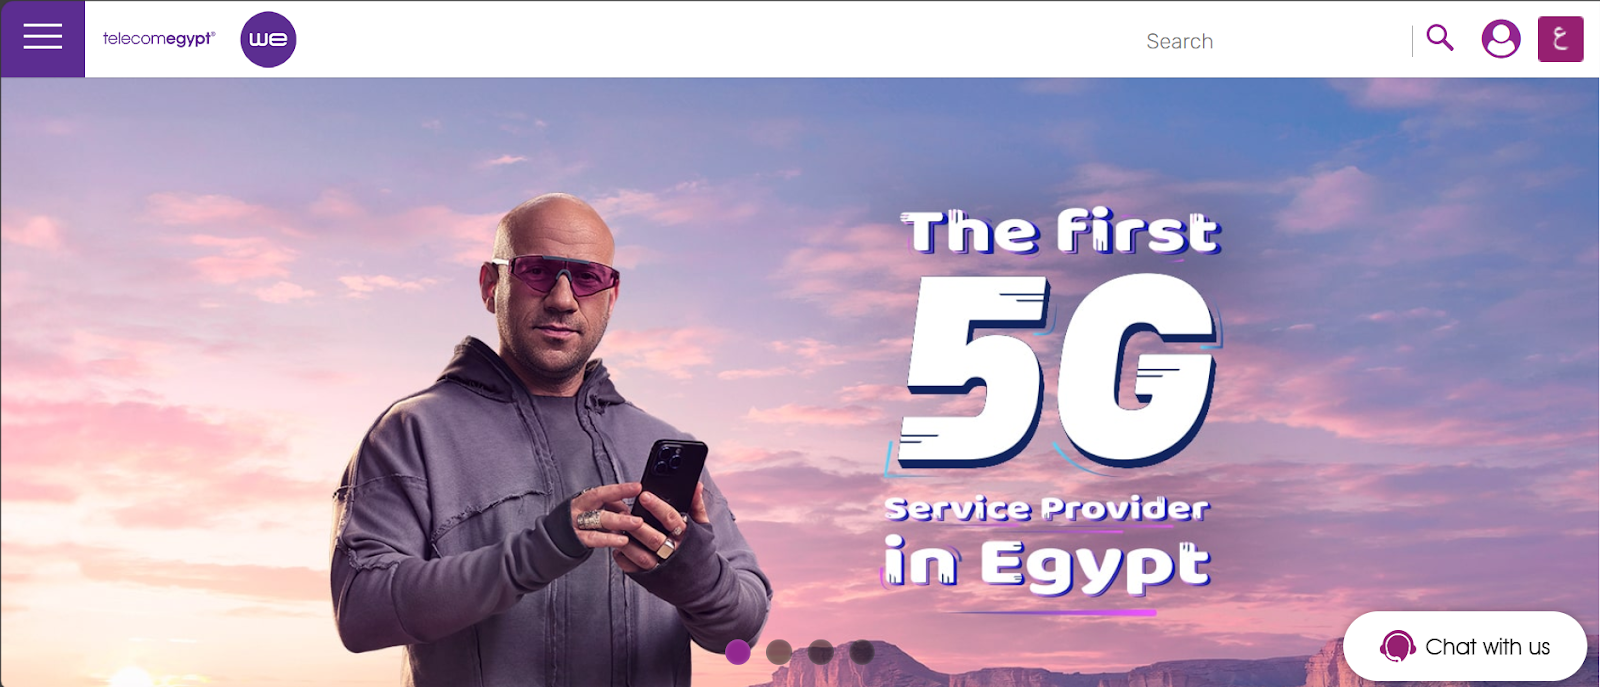 Telecom Egypt website snapshot highlighting the services it offers.